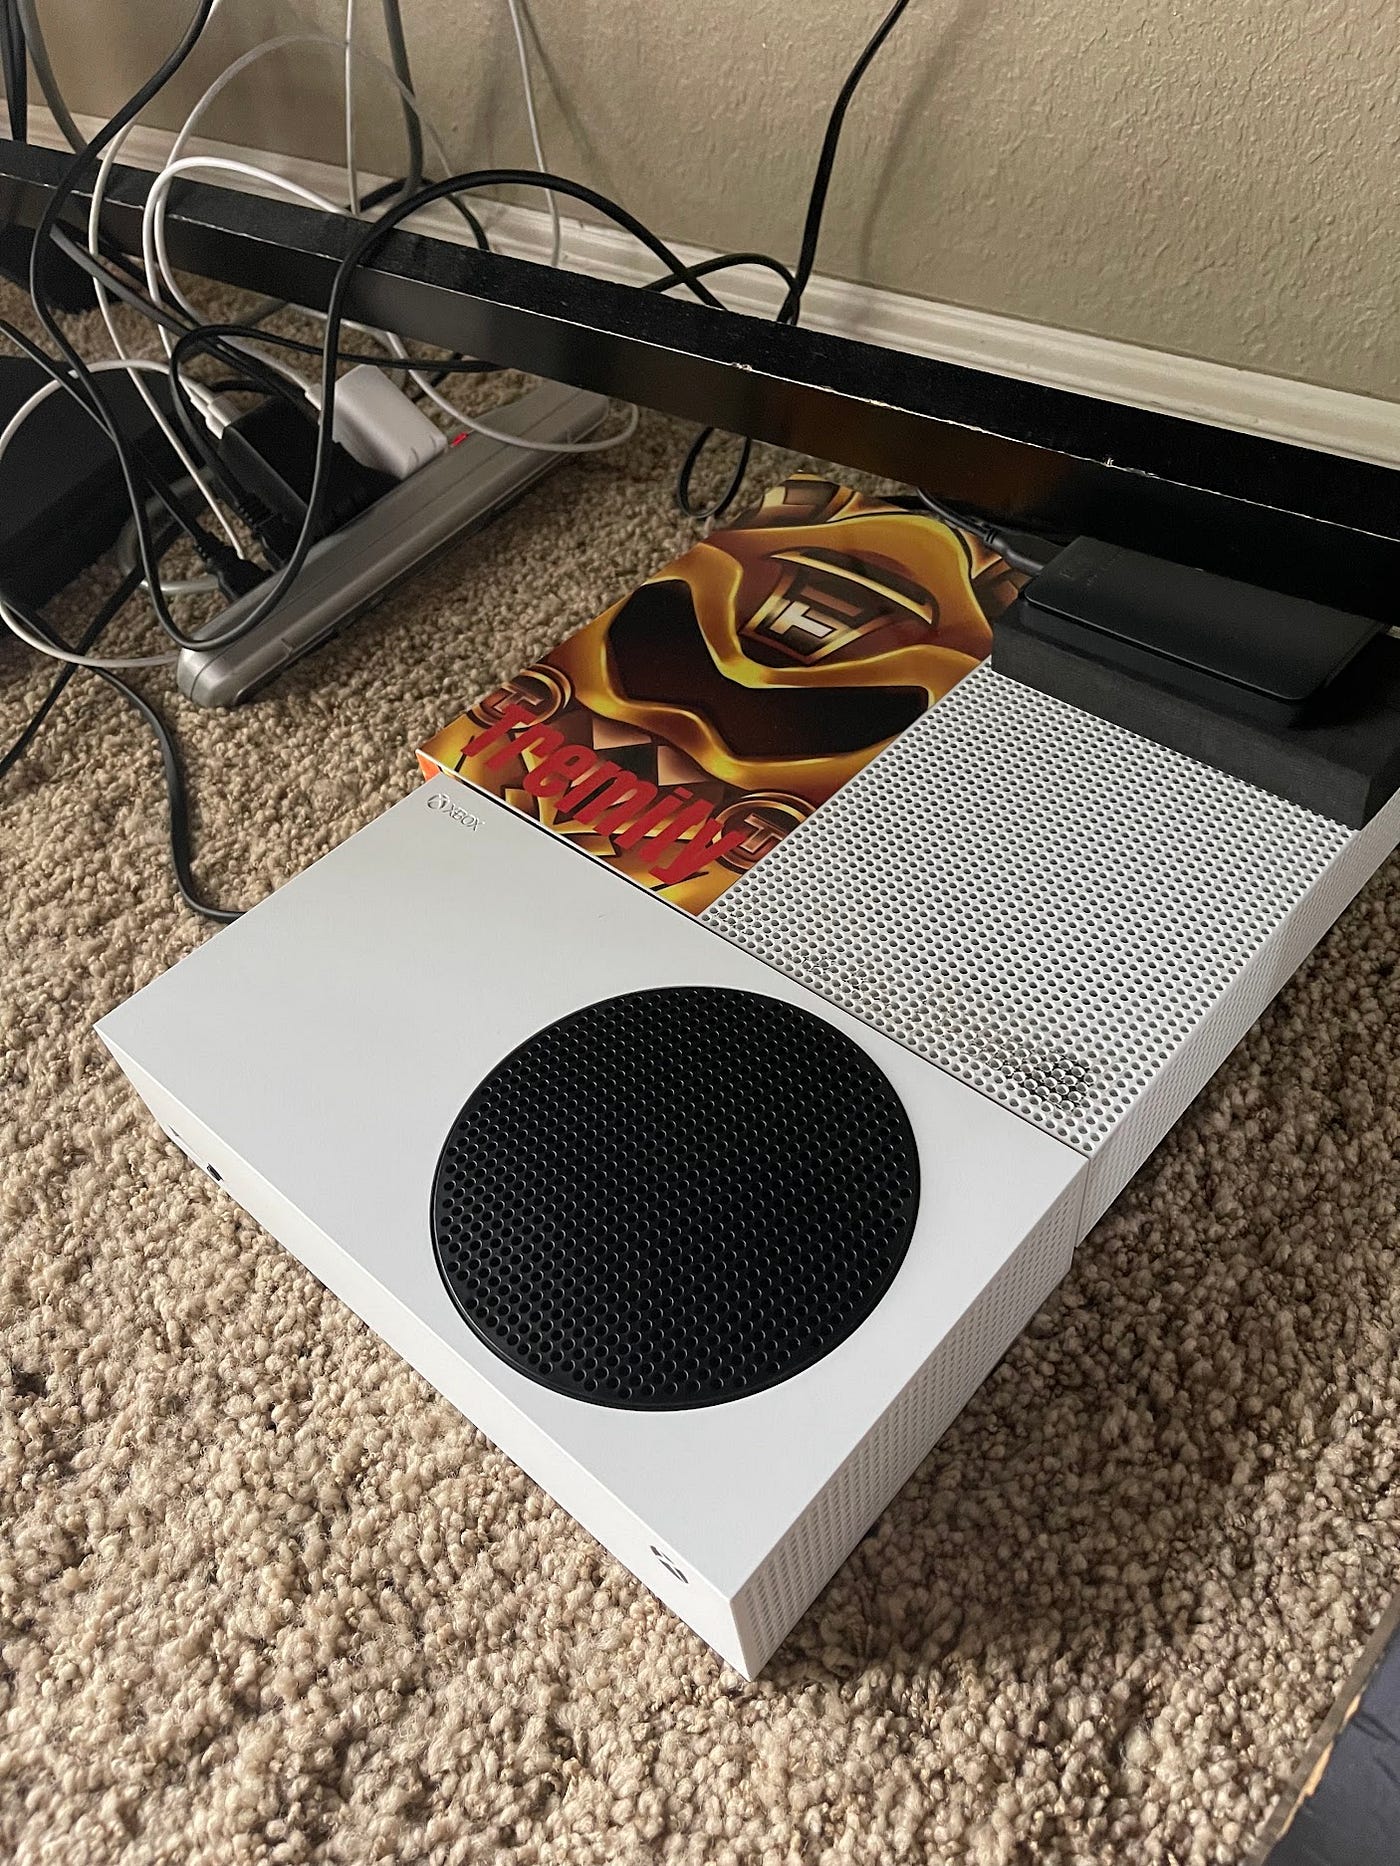 What's wrong with my Xbox Series S?, by John William Archer